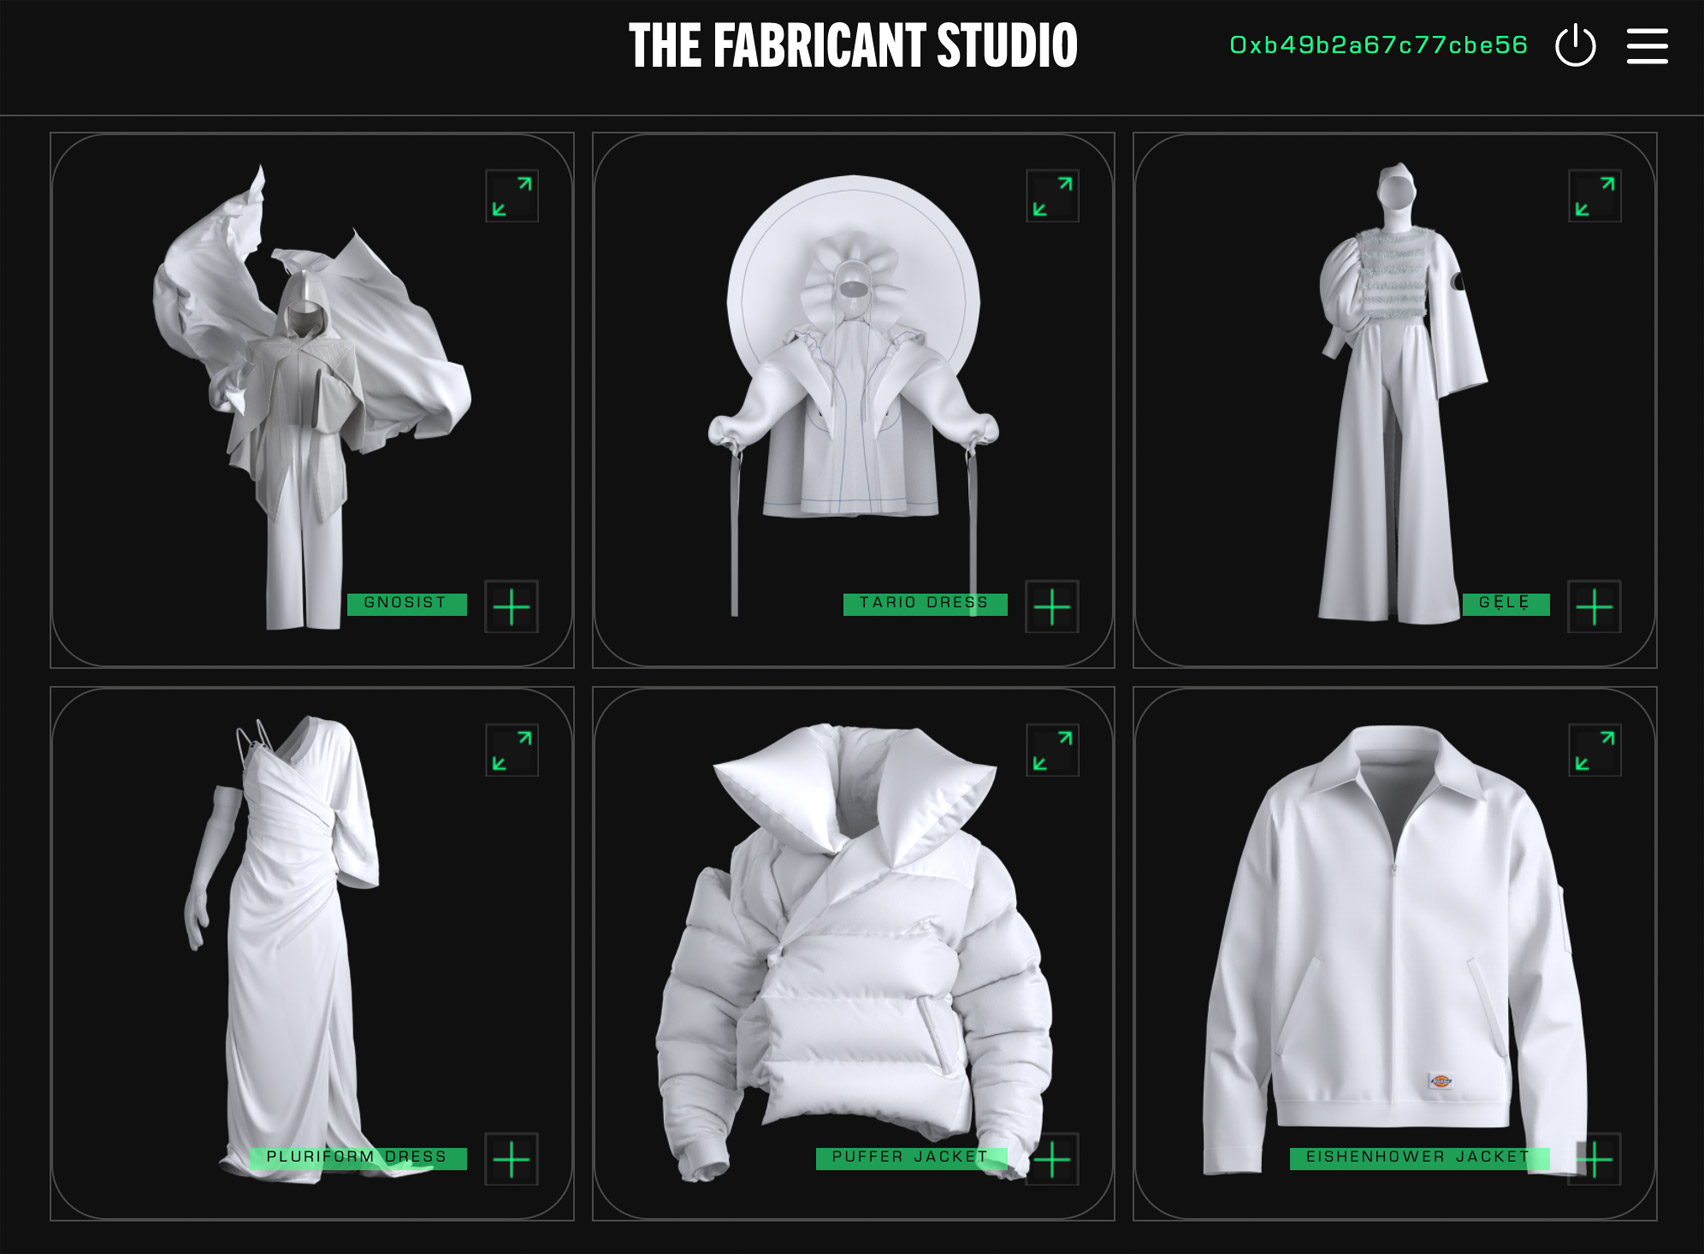 Master garments in The Fabricant Studio